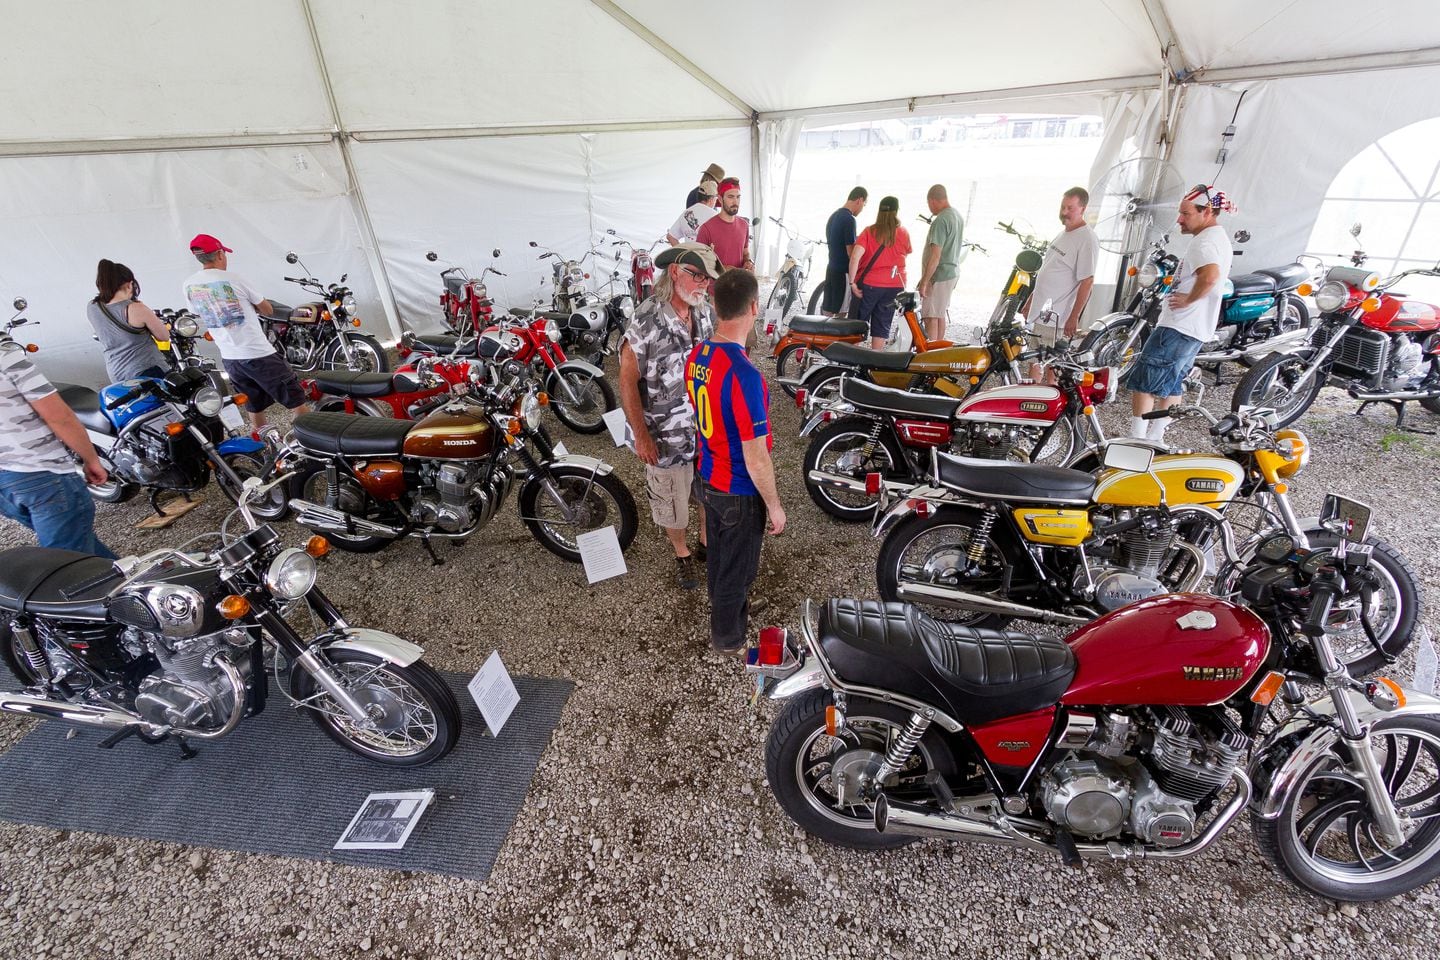 Vintage Japanese Motorcycle Club of North America to Host 40th